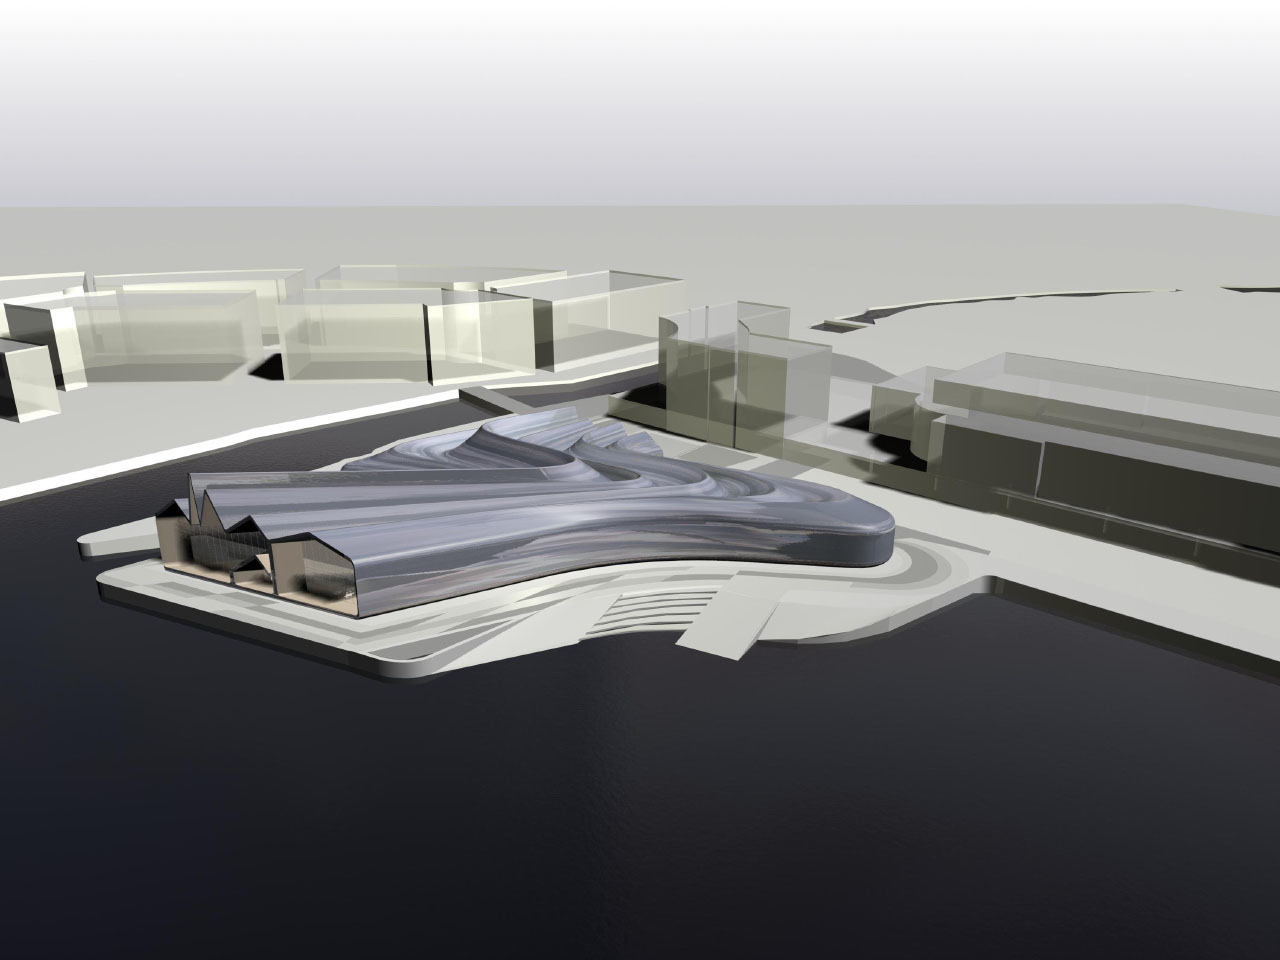 Zaha Hadid Architects’ Riverside Museum of Transport and Travel aerial rendering